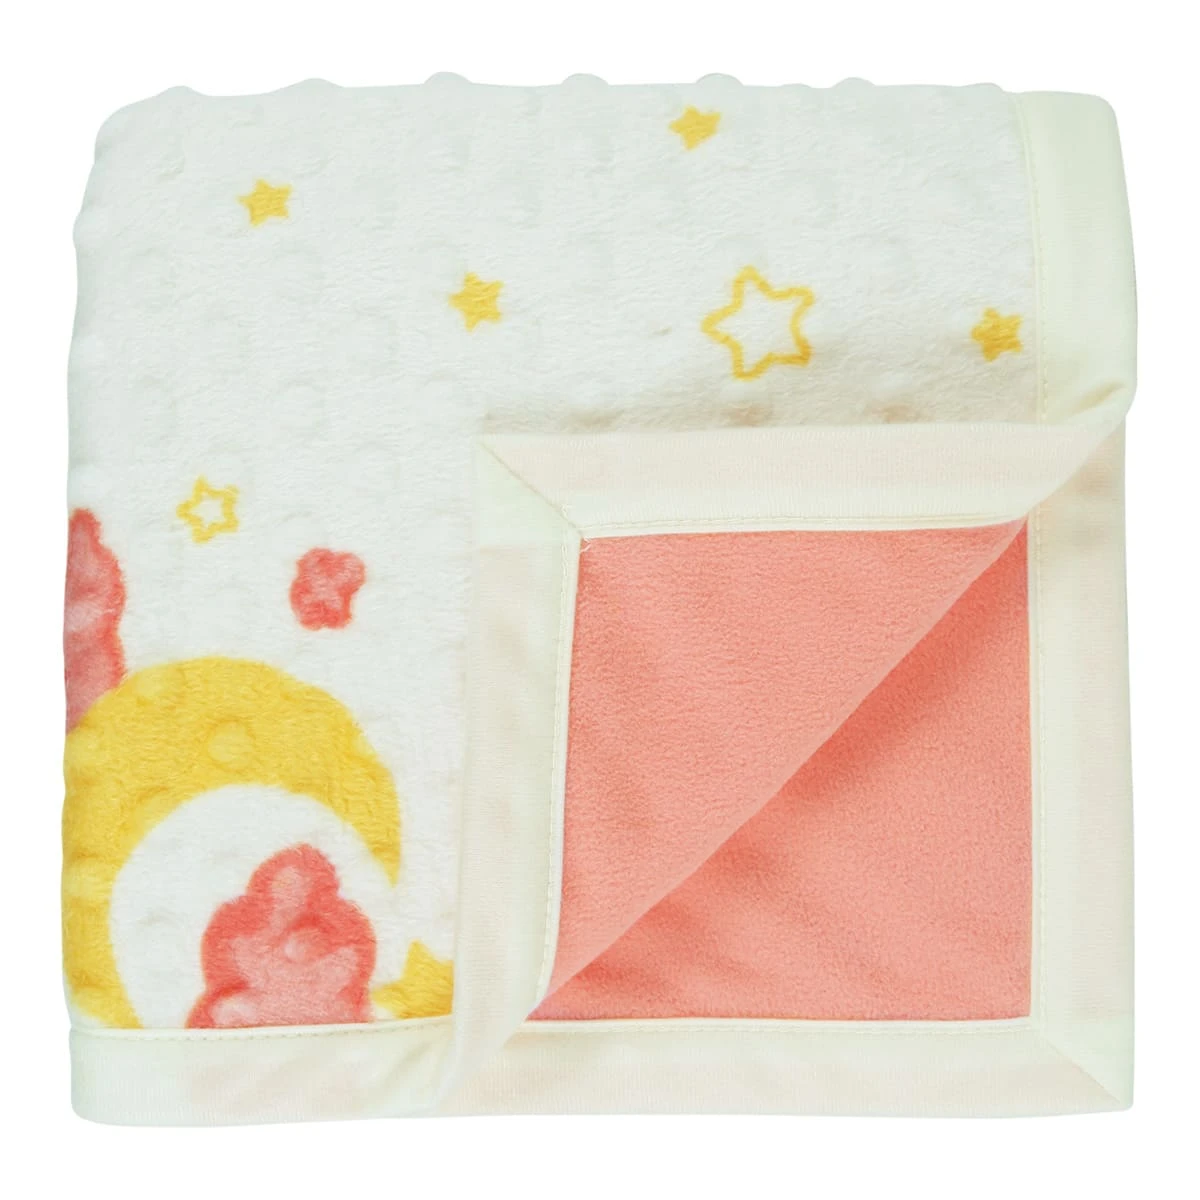 Moon Star and Cloud Printed Dimple Touch Velfleece Reversible Fleece Baby Blanket (Old Rose)